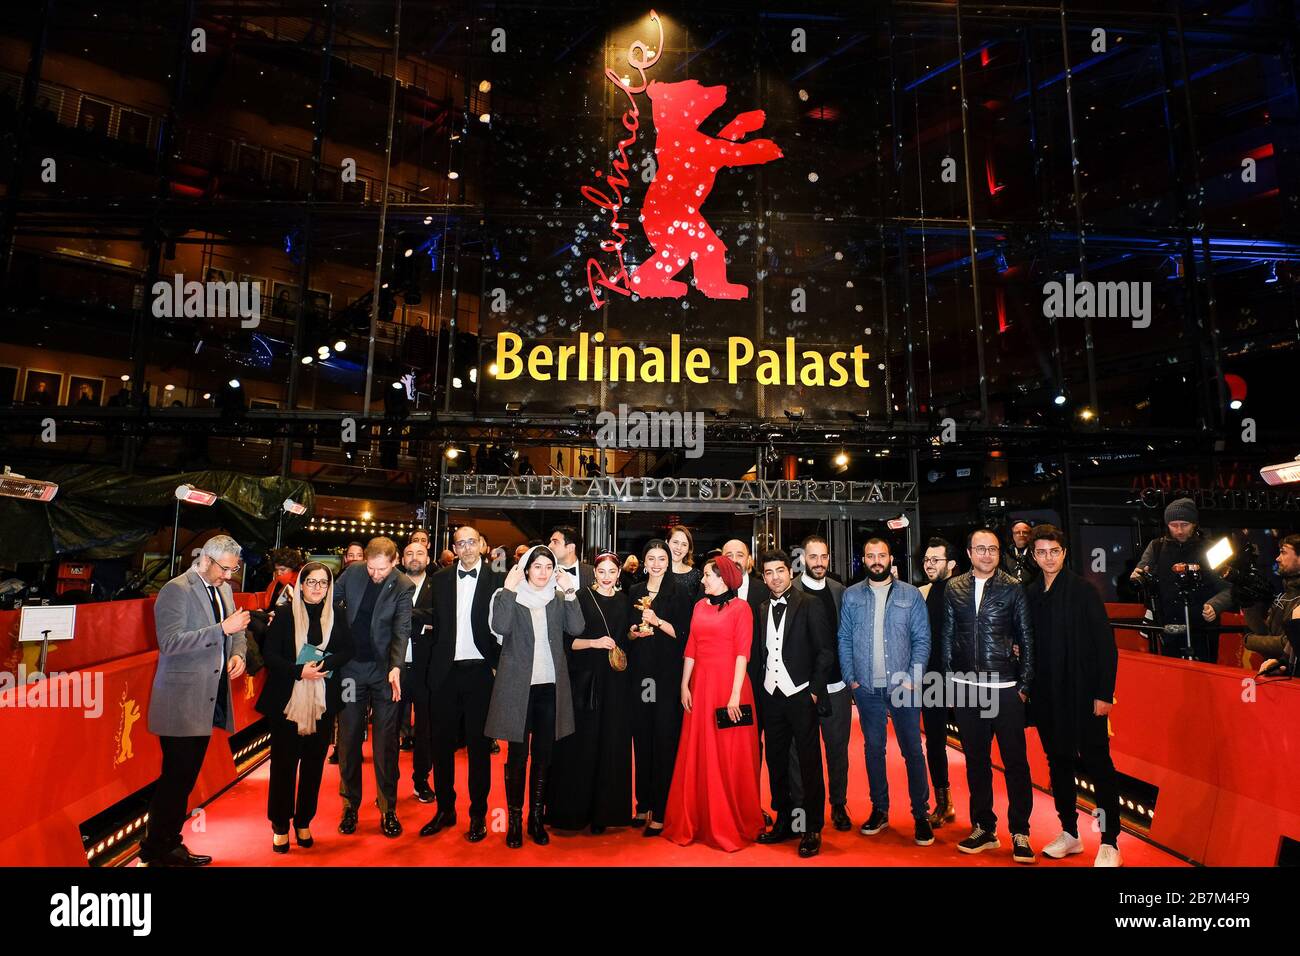 Cast and Crew of THERE IS NO EVIL ( Sheytan Vojud Nadarad ) poses with their award Golden Bear for Best Film  on the Red Carpet at the Closing Ceremony and Awards for the 70th Berlin International Film Festival ( Berlinale ) on Saturday 29 February 2020 at Berlinale Palast, Potsdamer Platz, Berlin. . Picture by Julie Edwards. Stock Photo